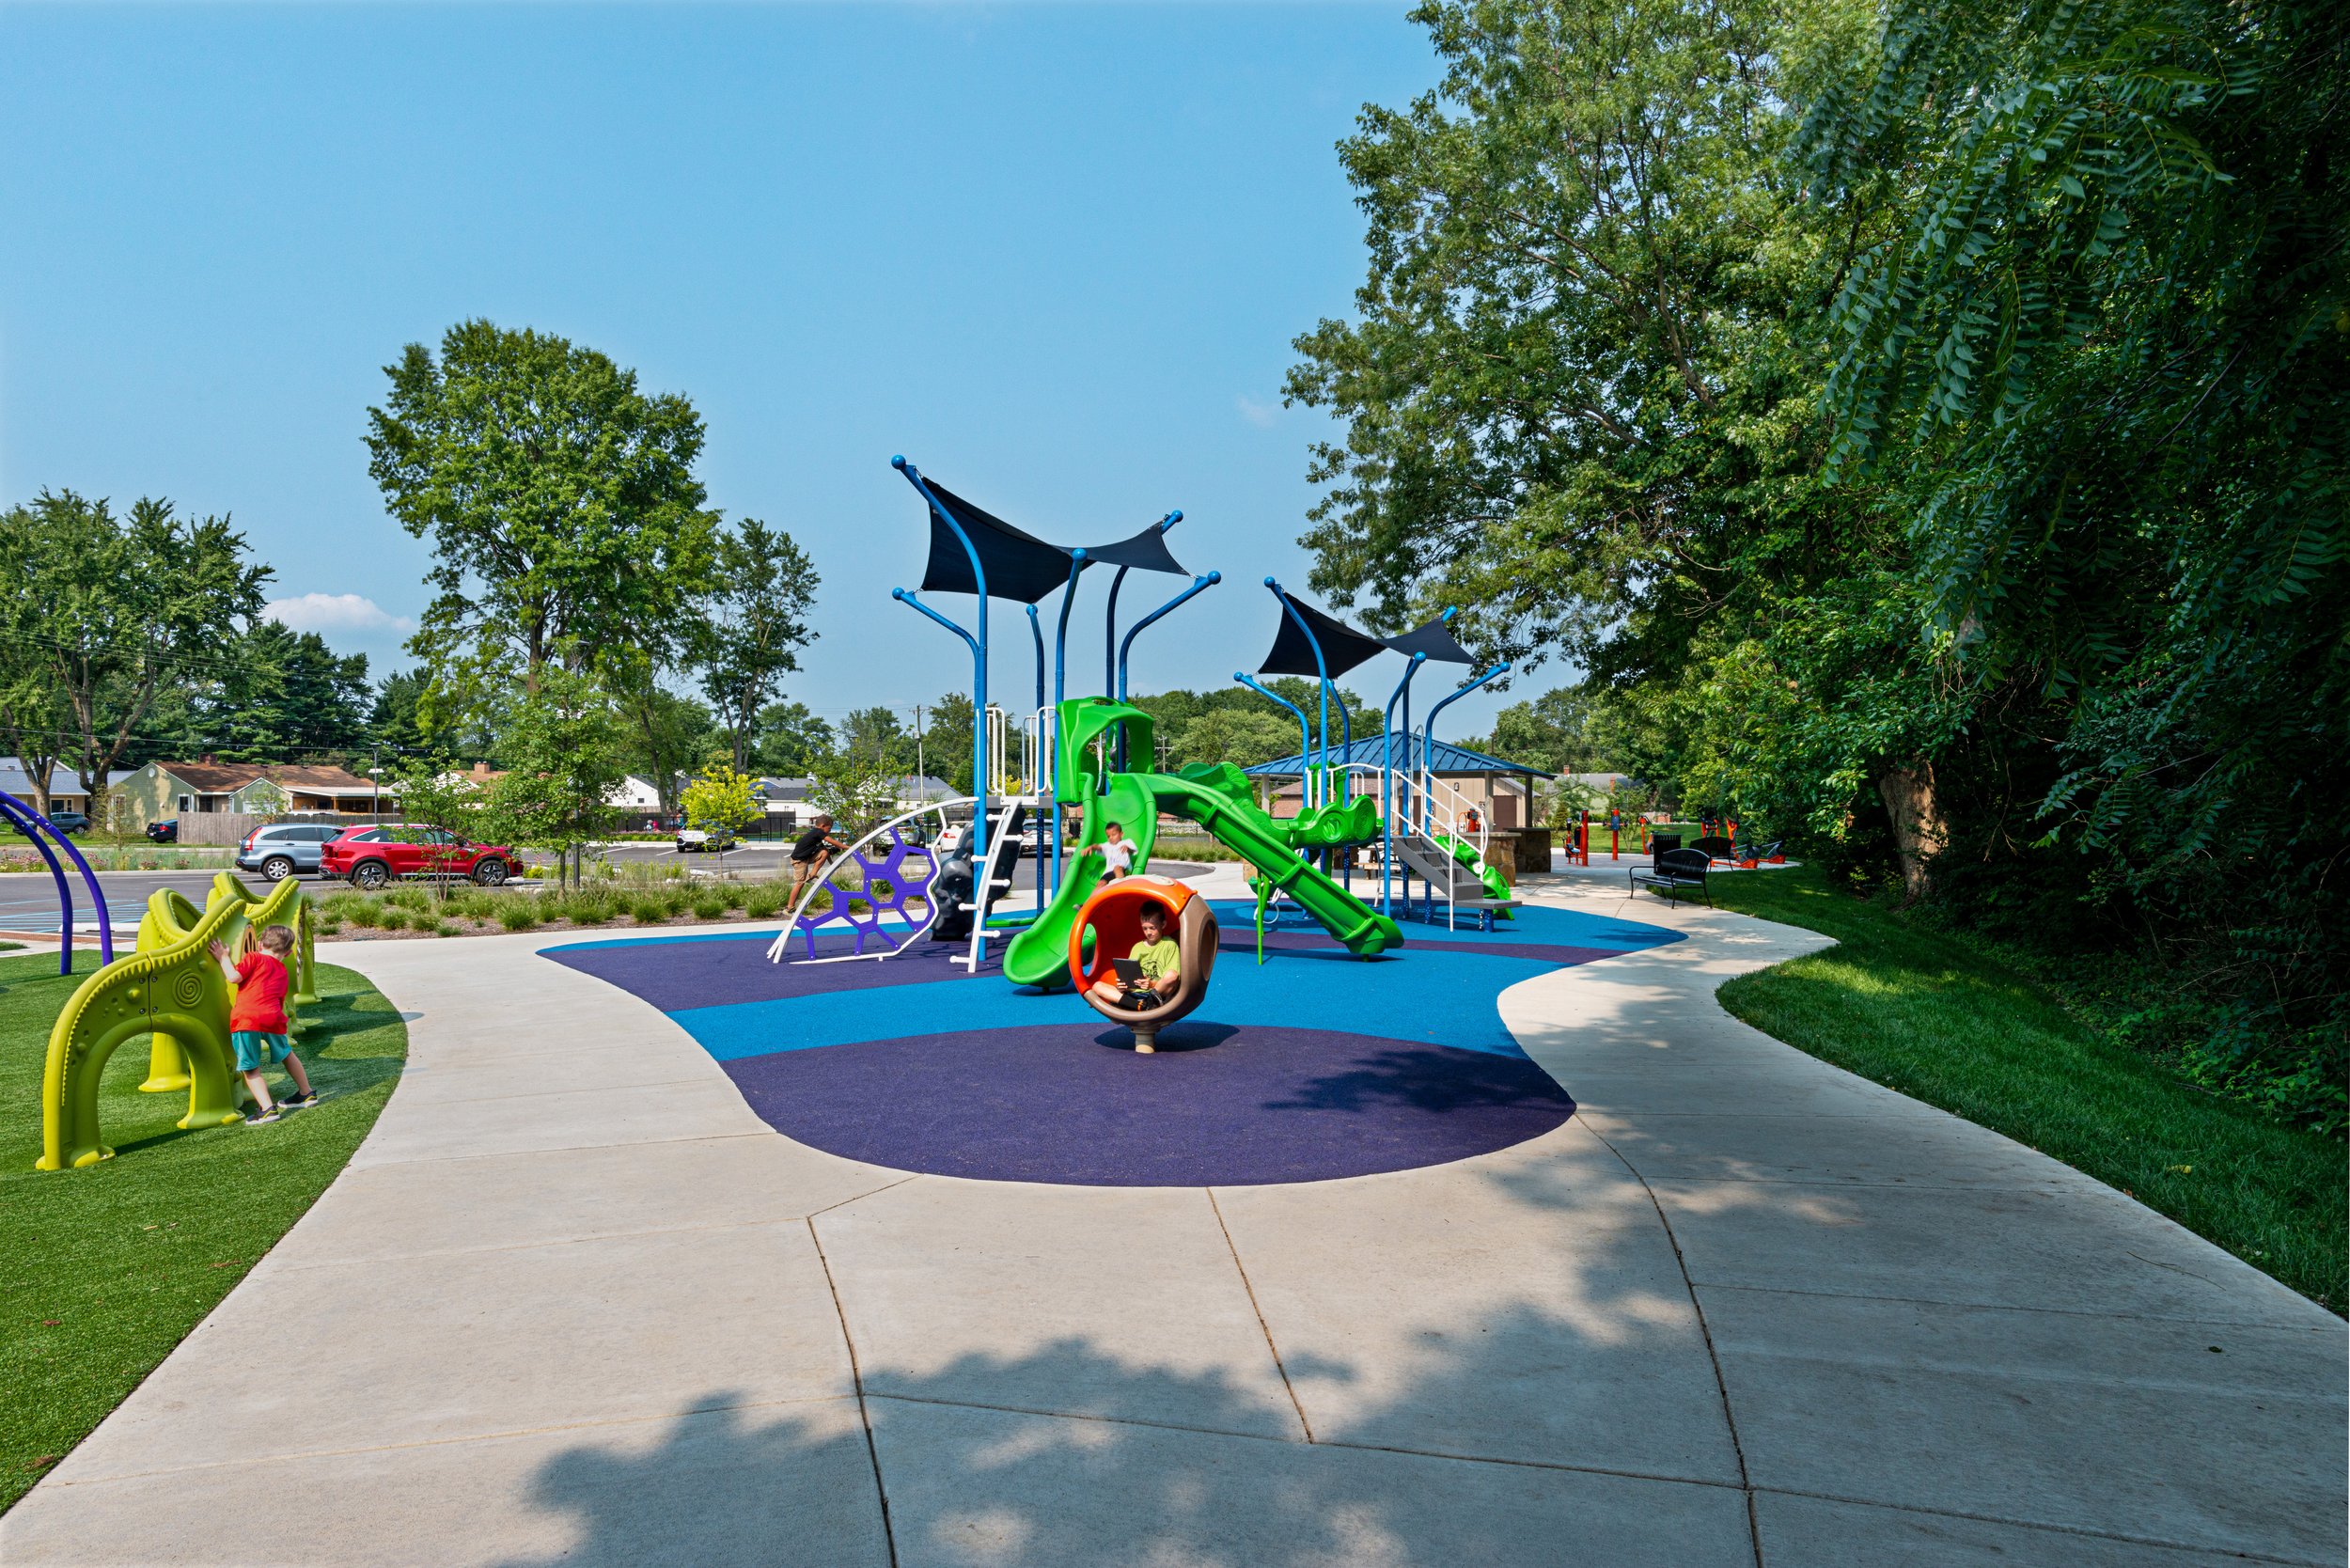 A photography of a public playground in open spaces.